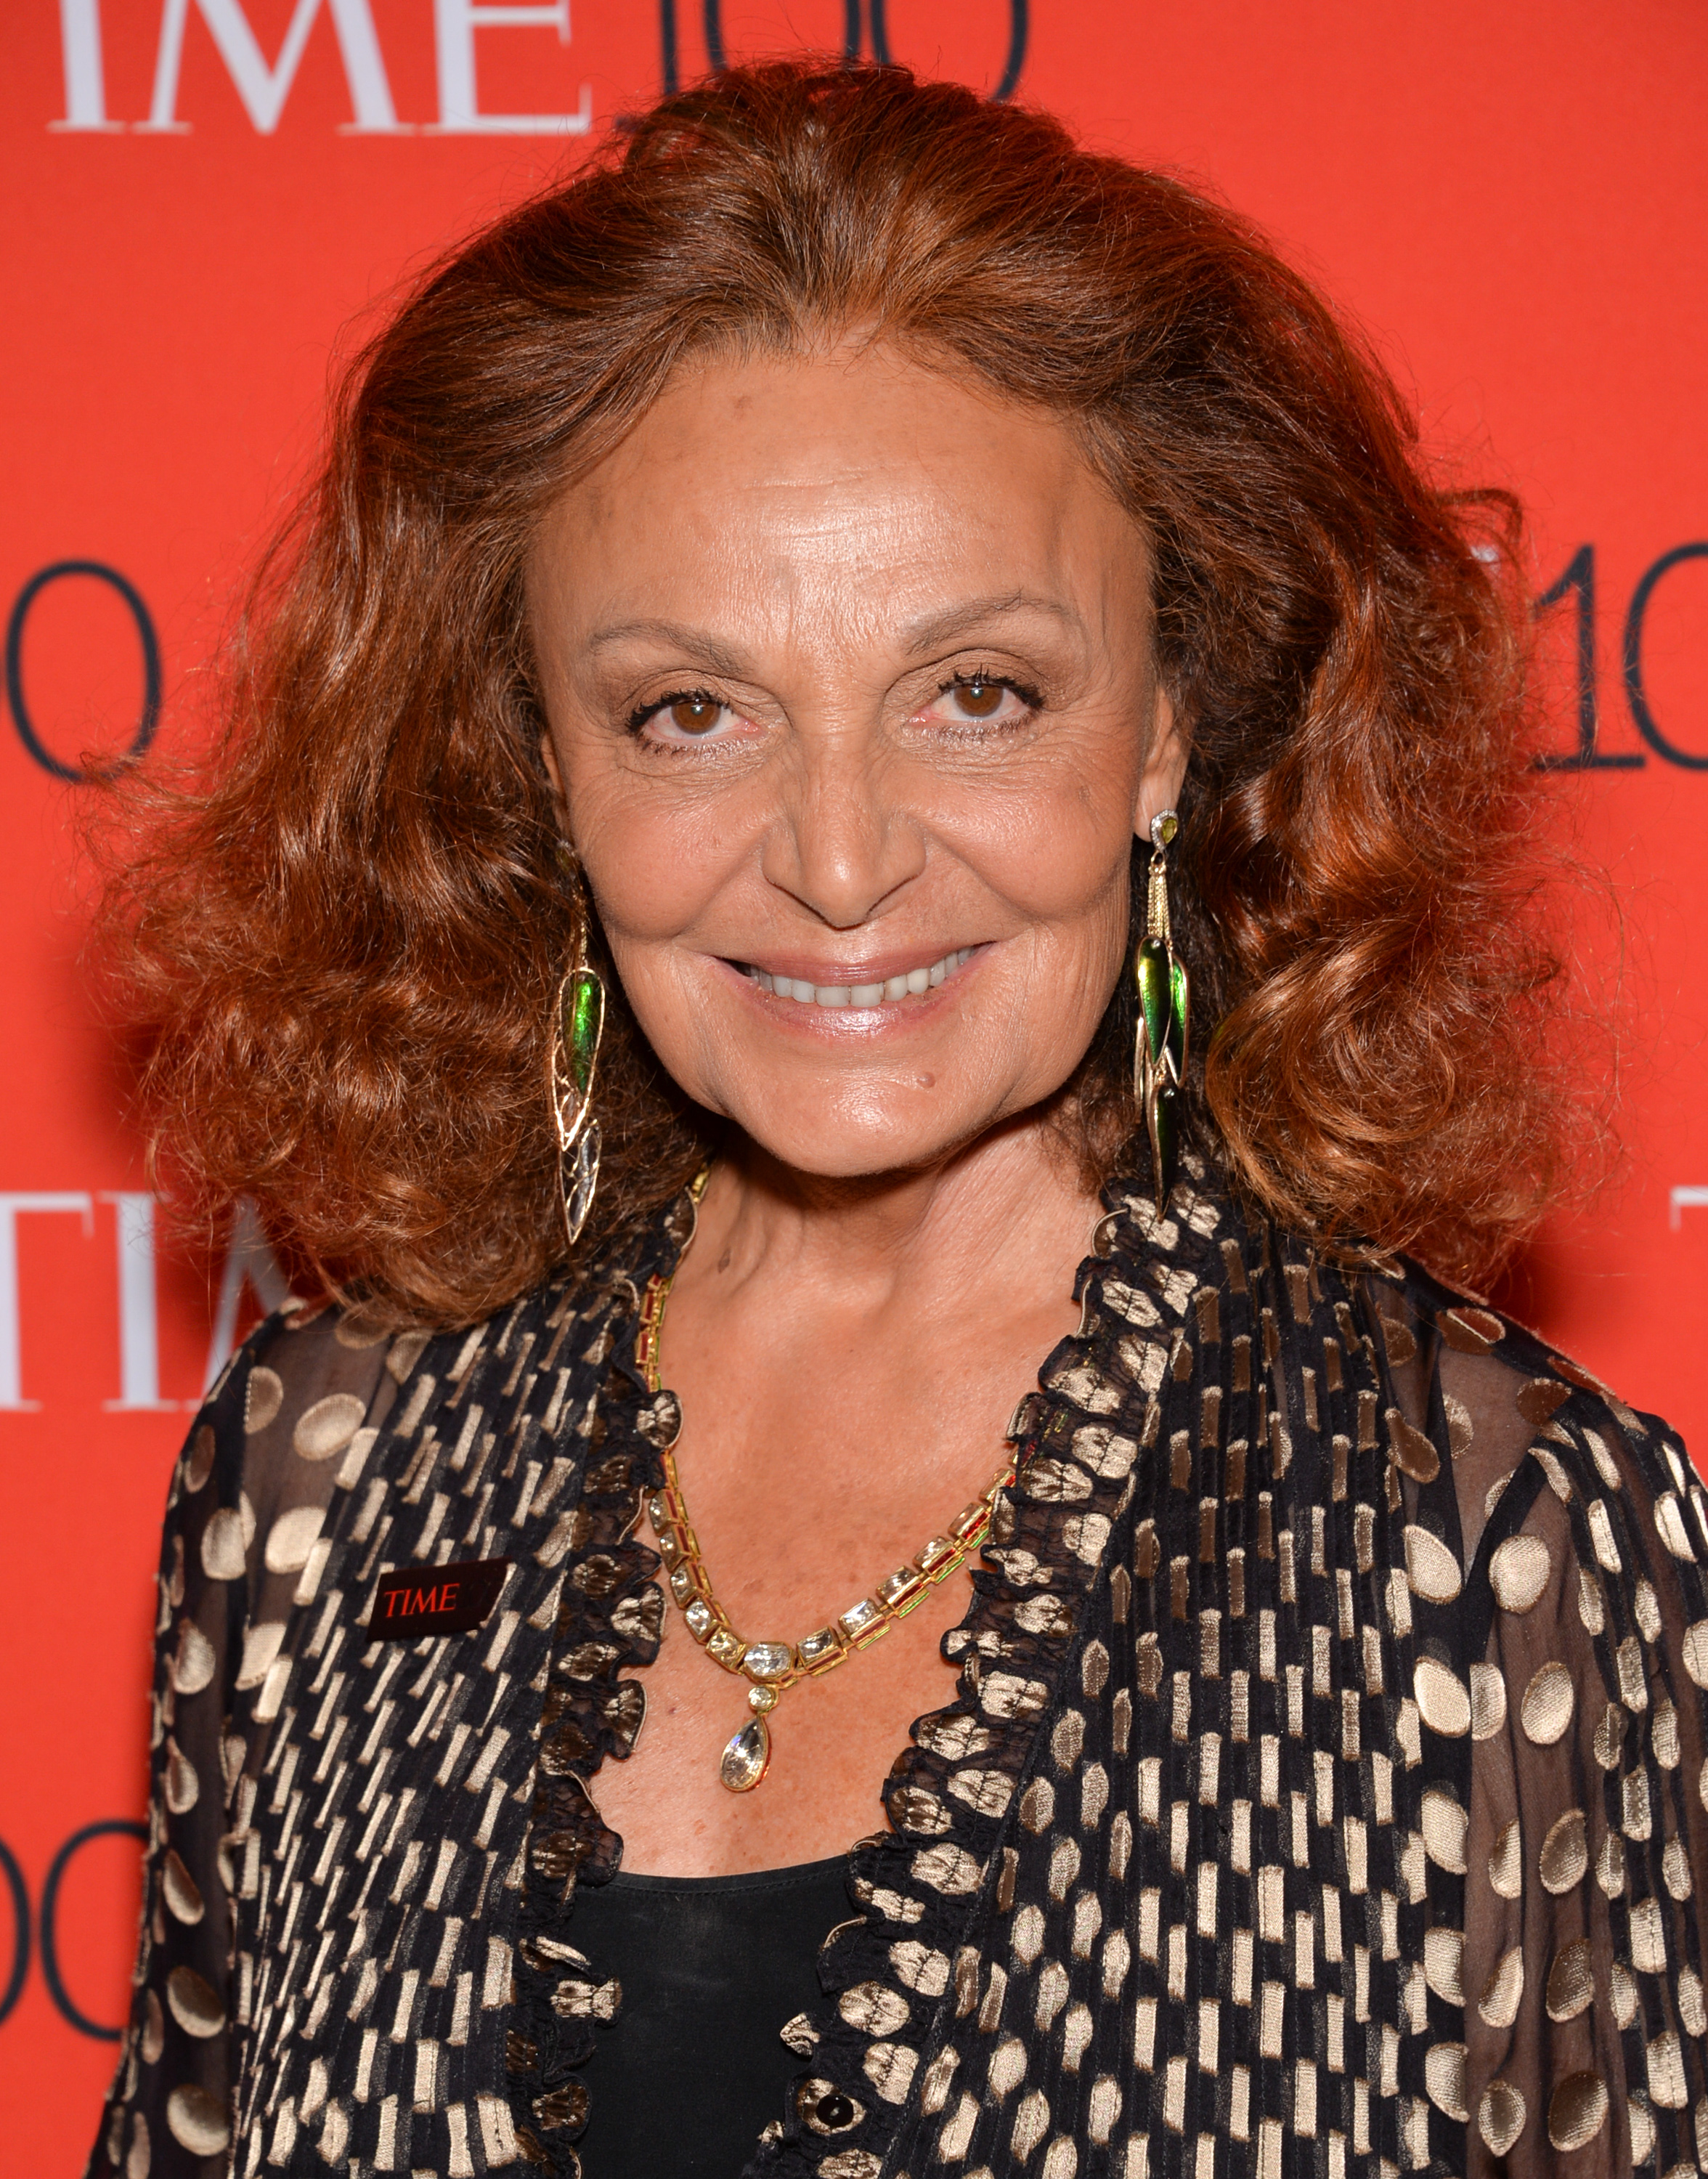 Diane von Furstenberg attends the TIME 100 Gala in New York City on April 21, 2015.